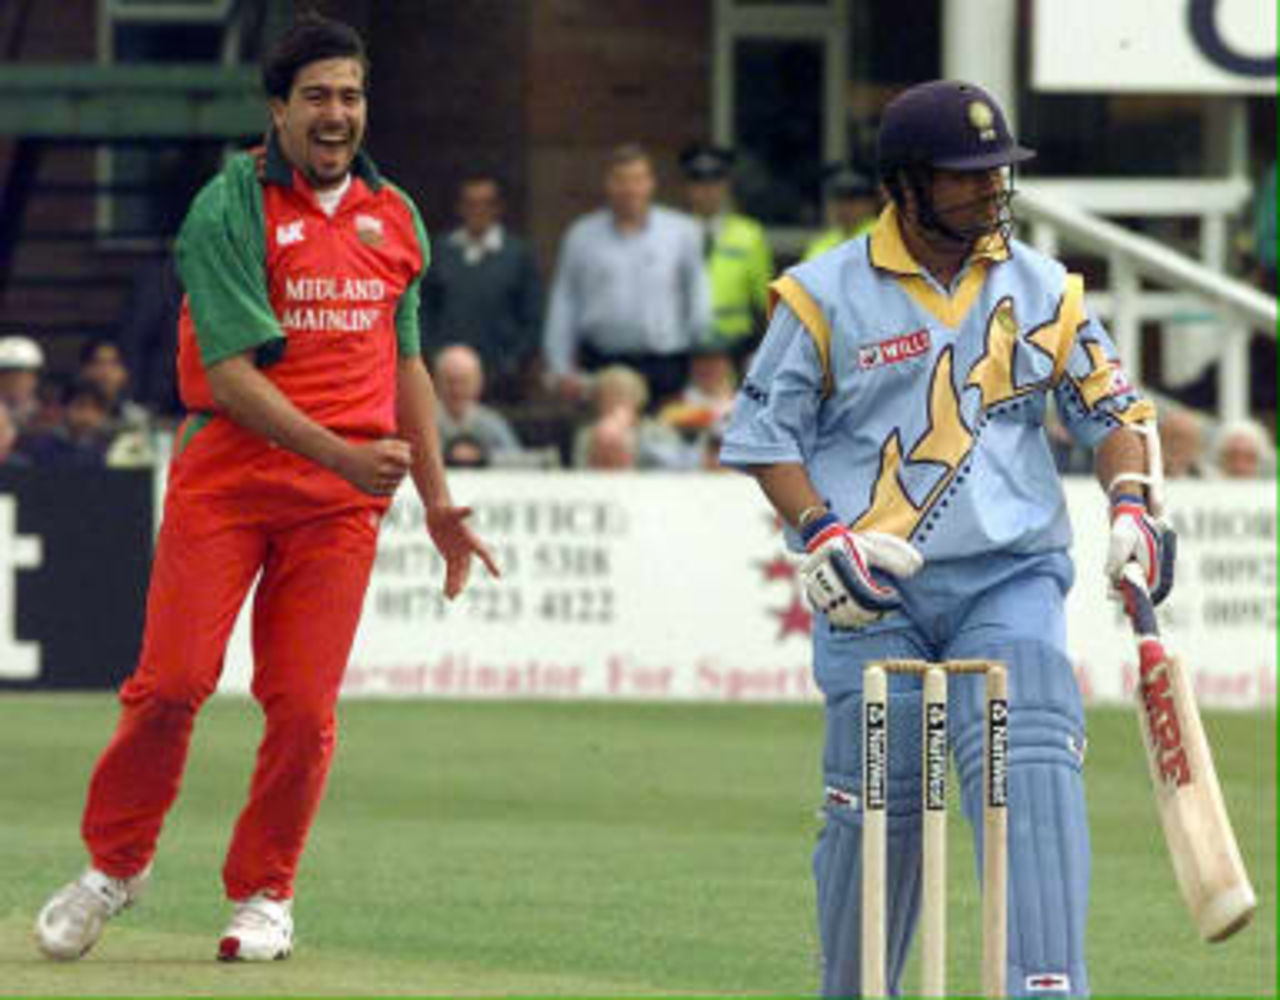 Ormond celebrates after trapping  Tendulkar lbw  in the first over of the India-Leicestershire  World Cup warm-up game, May 7 1999